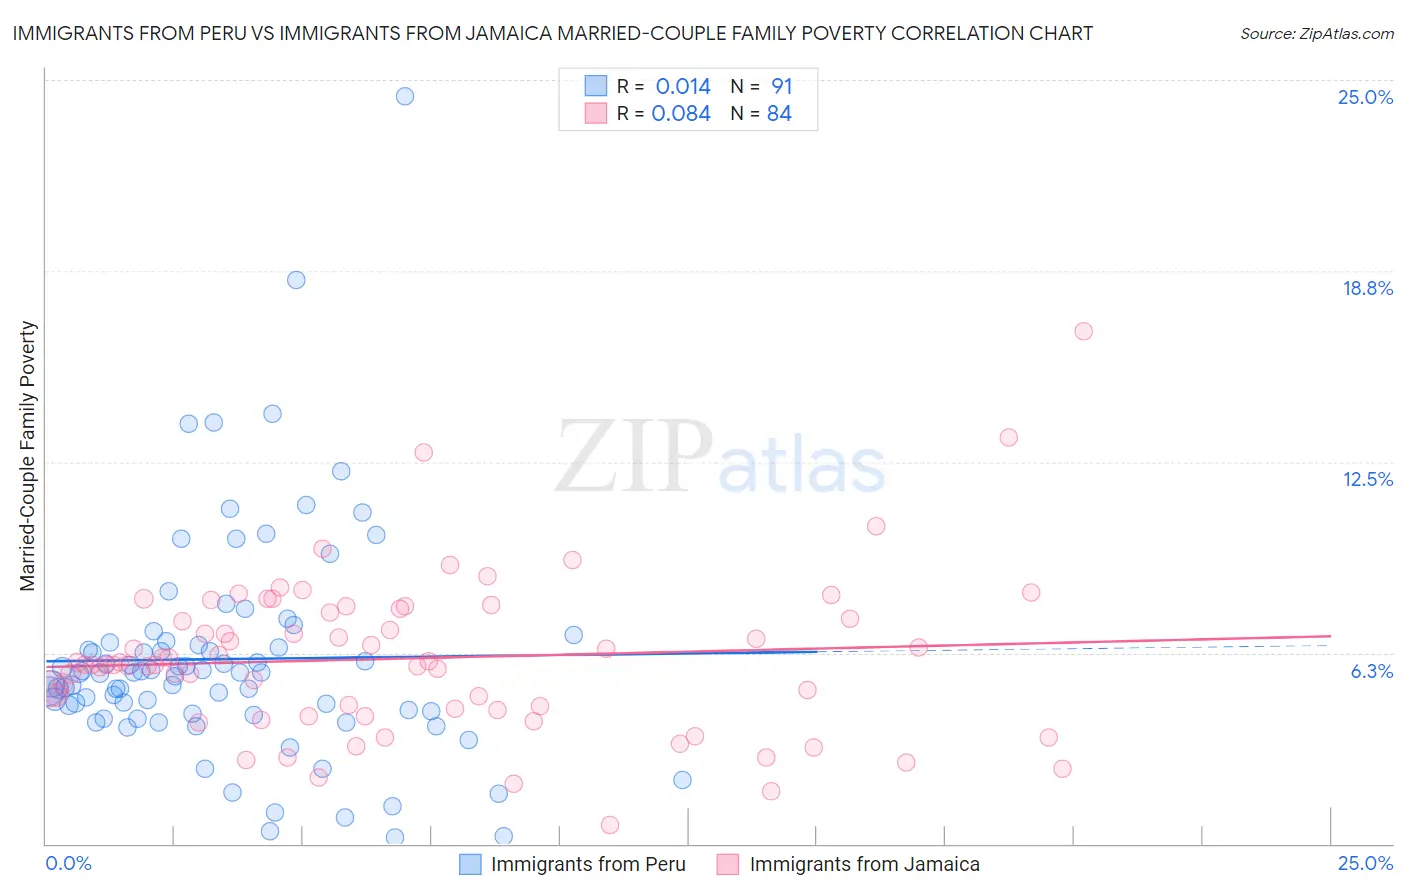 Immigrants from Peru vs Immigrants from Jamaica Married-Couple Family Poverty